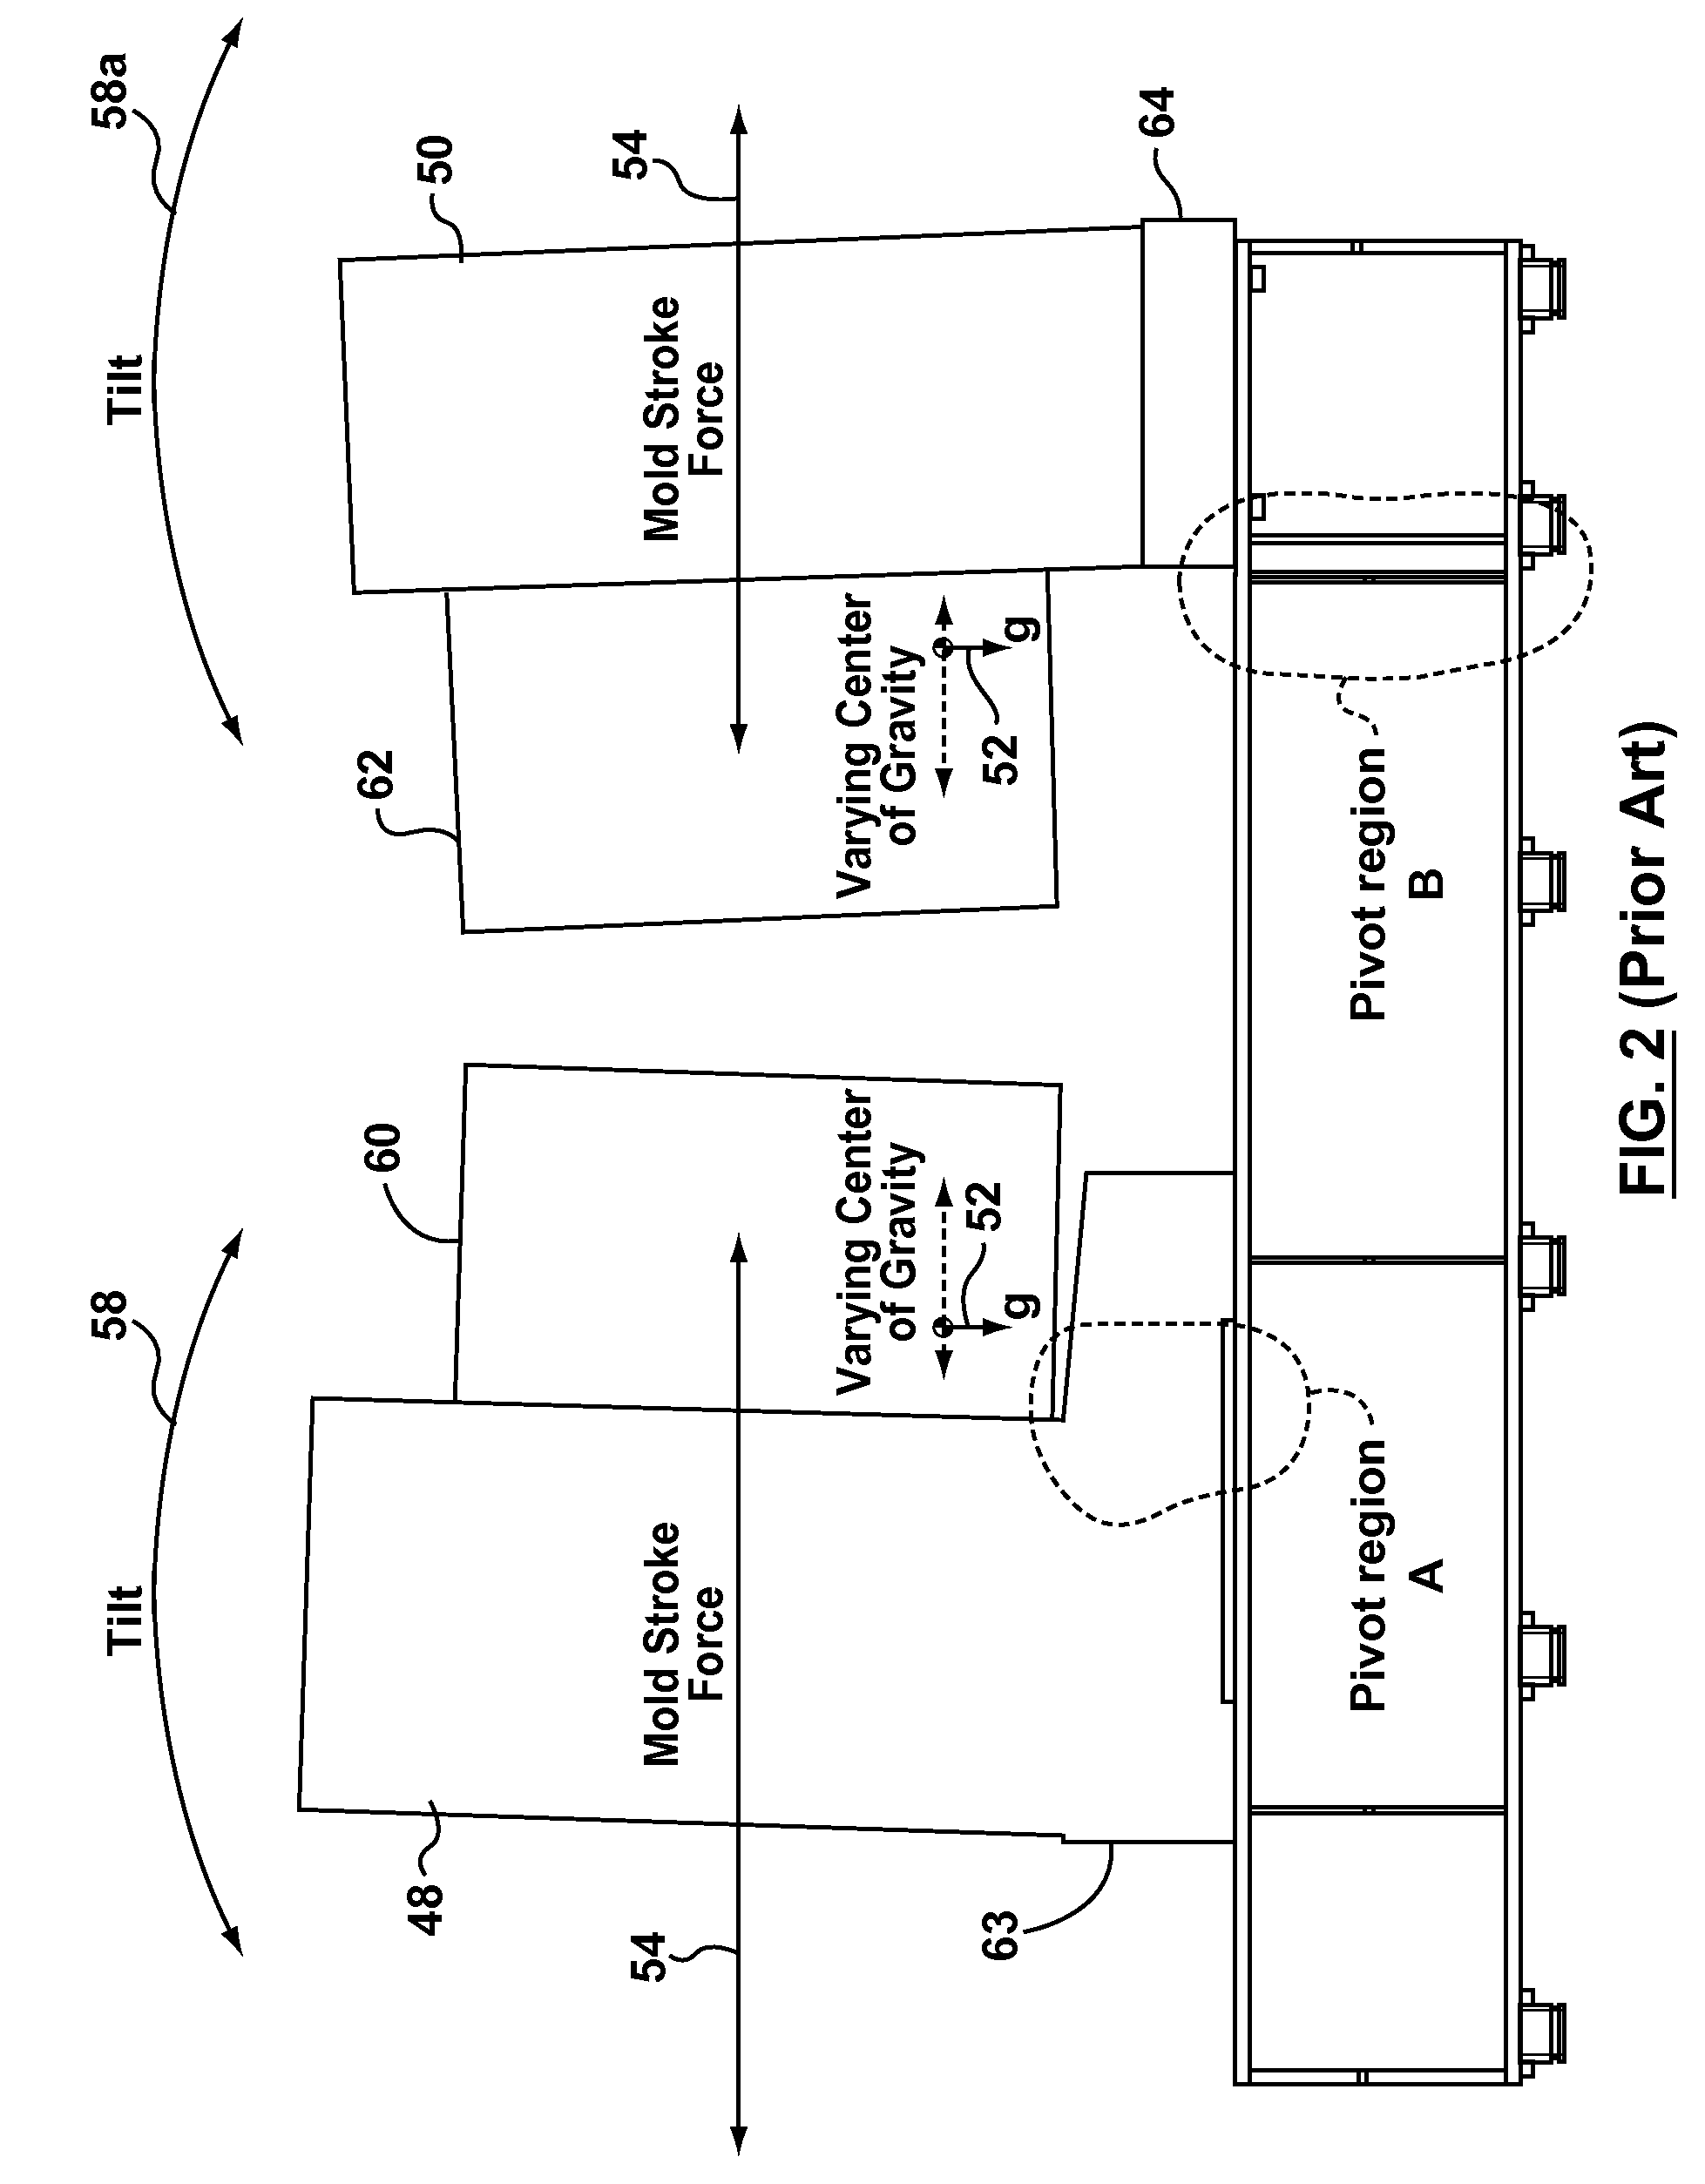 Platen Assembly, Molding System and Method for Platen Orientation and Alignment